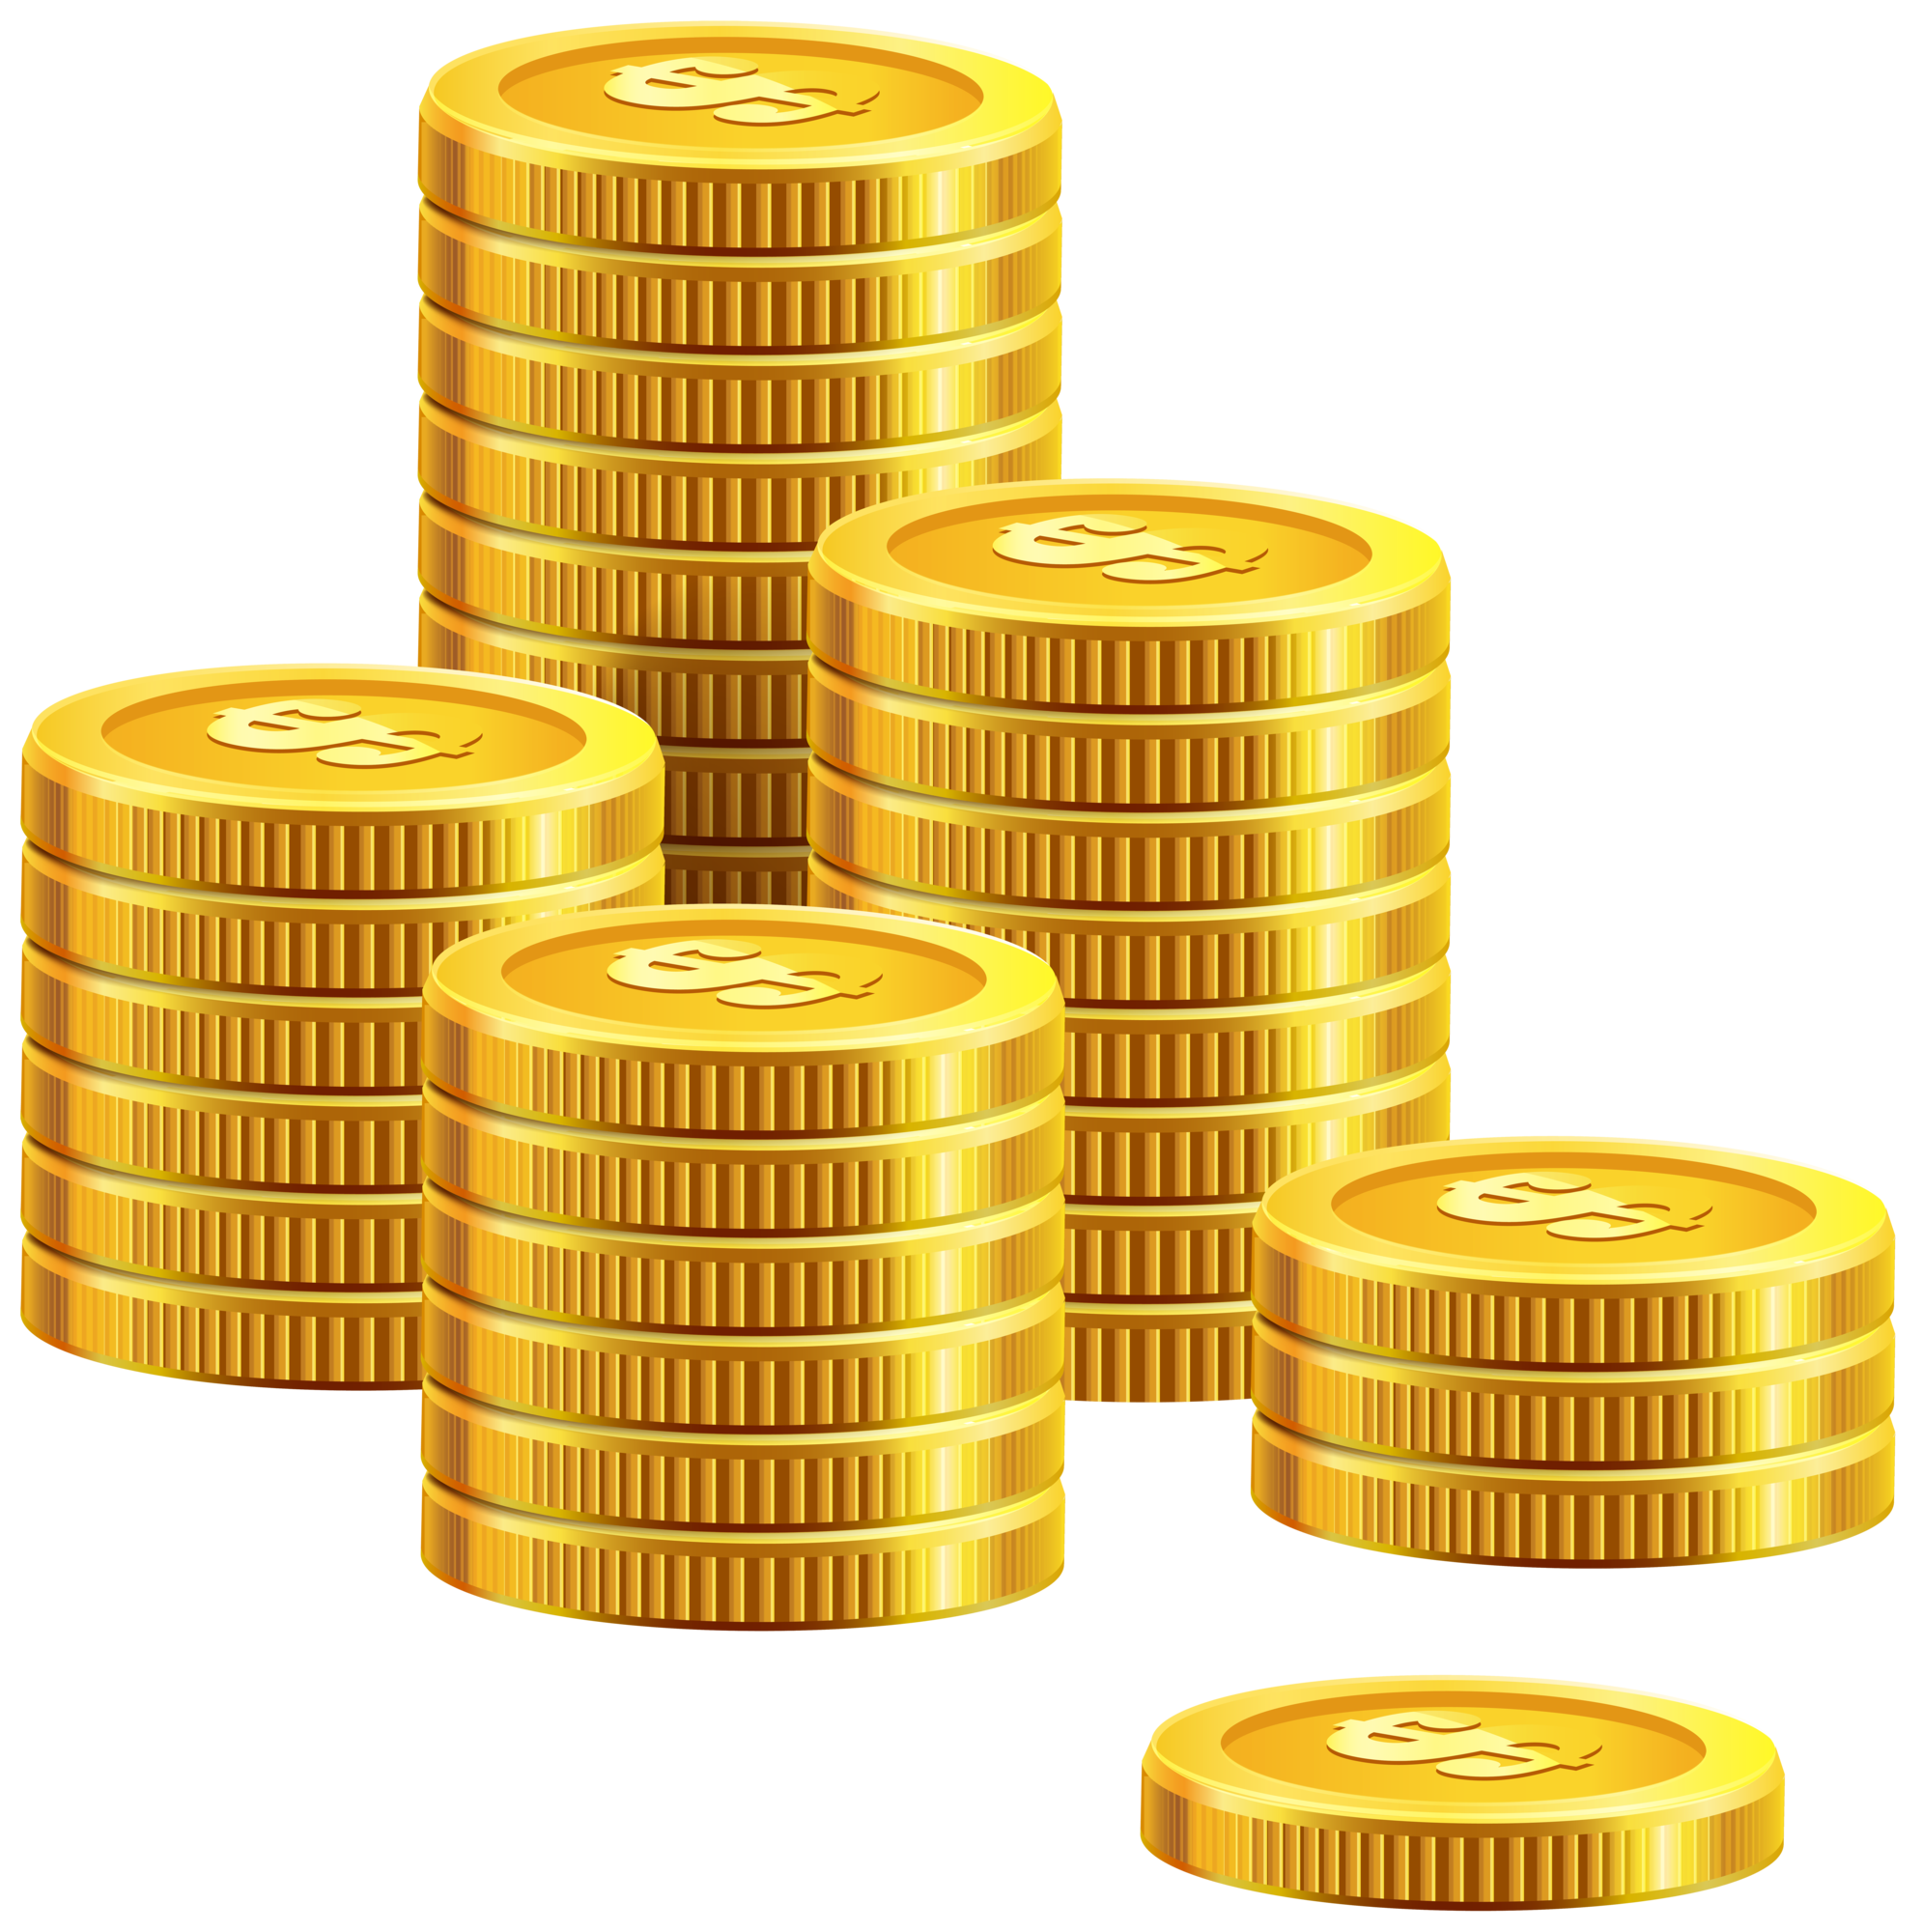 Coins Clip Art and Stock Illustrations. 363,672 Coins EPS - Clip Art ...